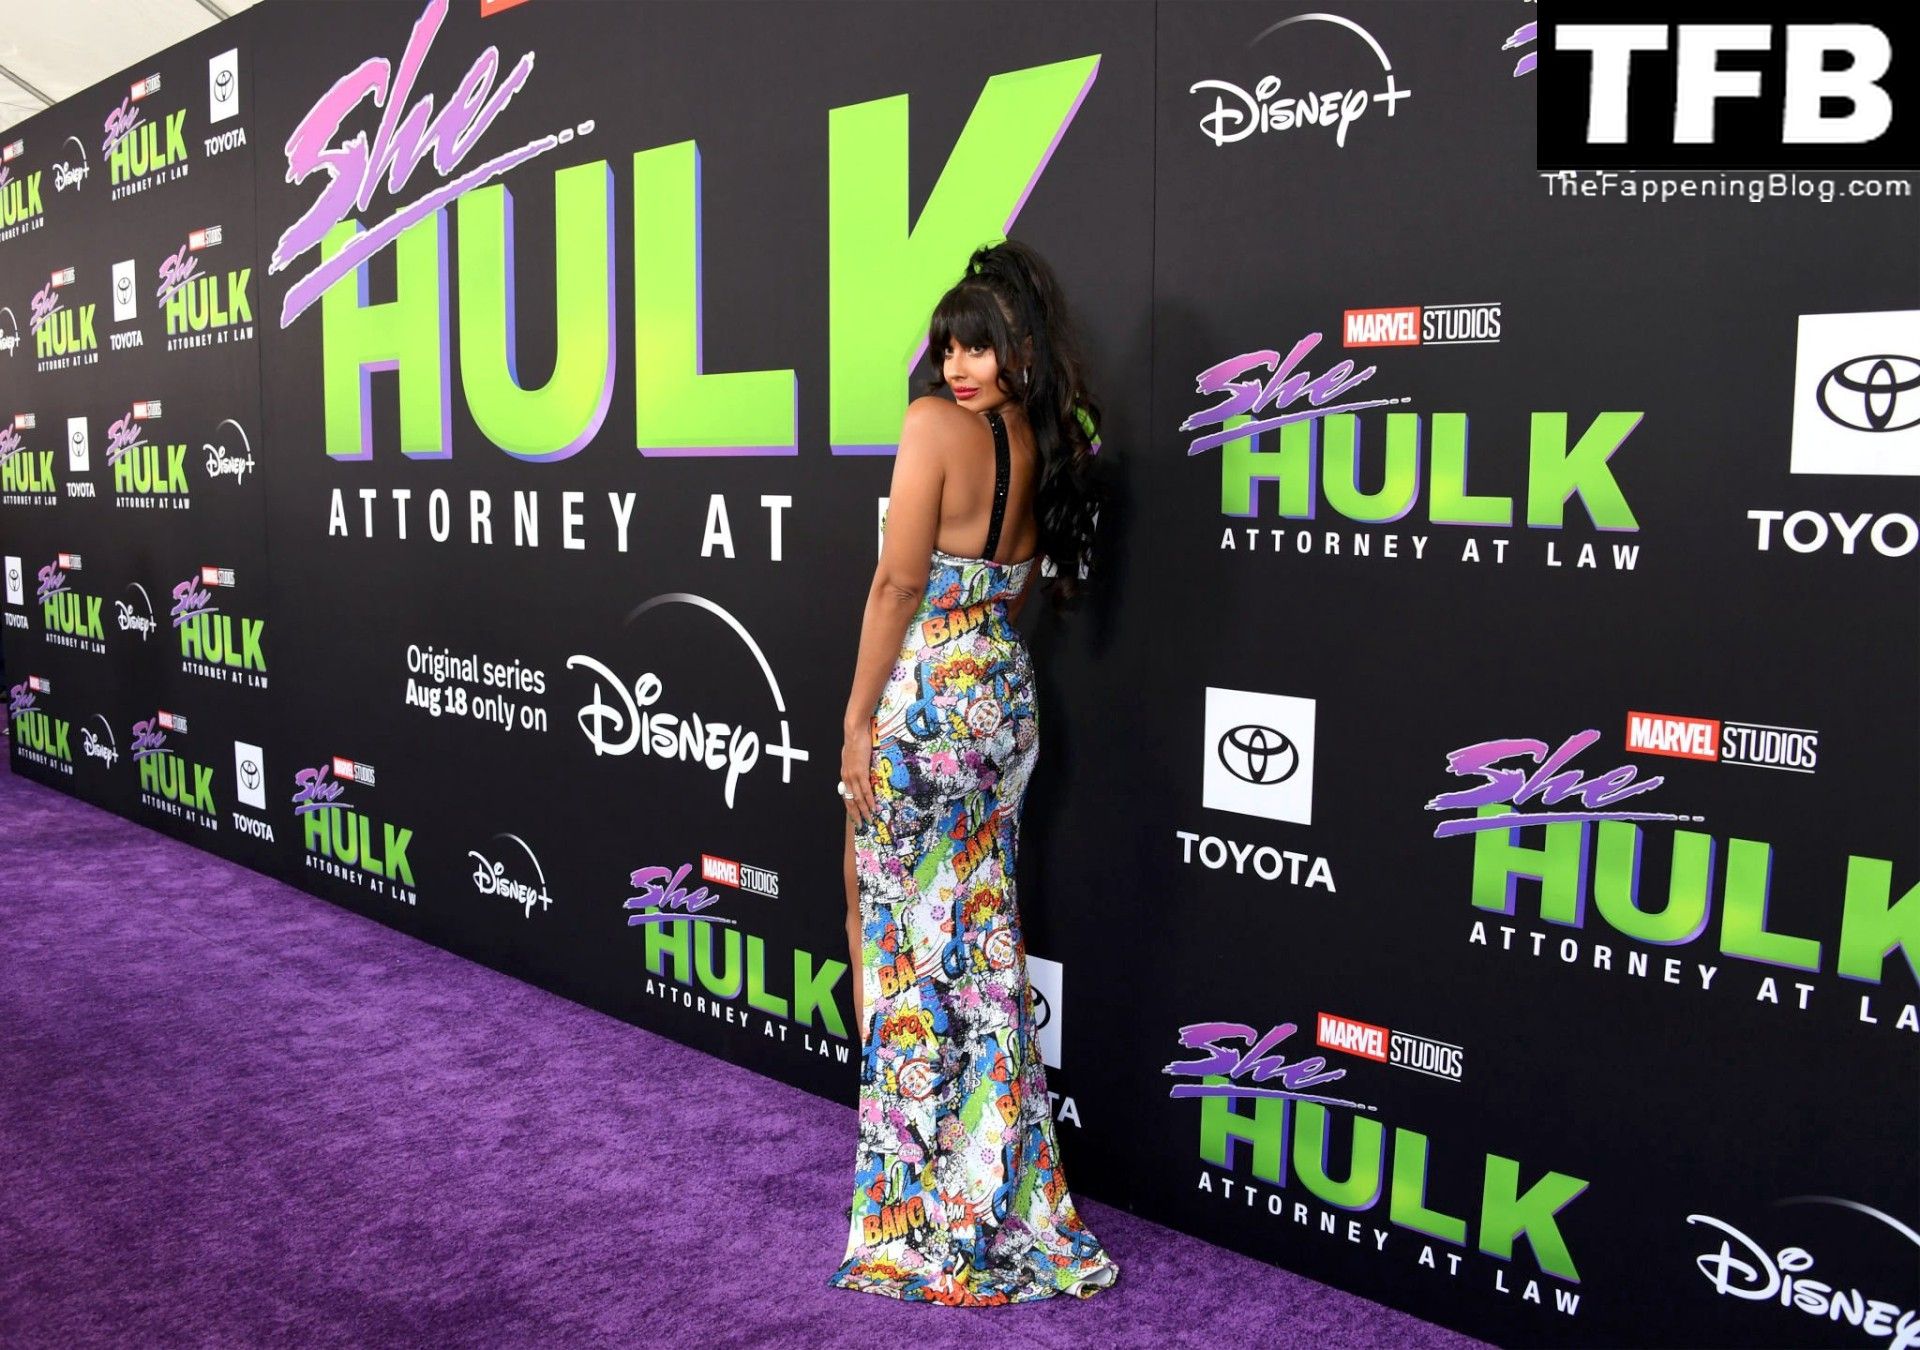 Jameela Jamil Sexy The Fappening Blog 35 - Jameela Jamil Flaunts Her Big Tits at the Premiere of Disney+’s “She Hulk: Attorney at Law” in LA (53 Photos)